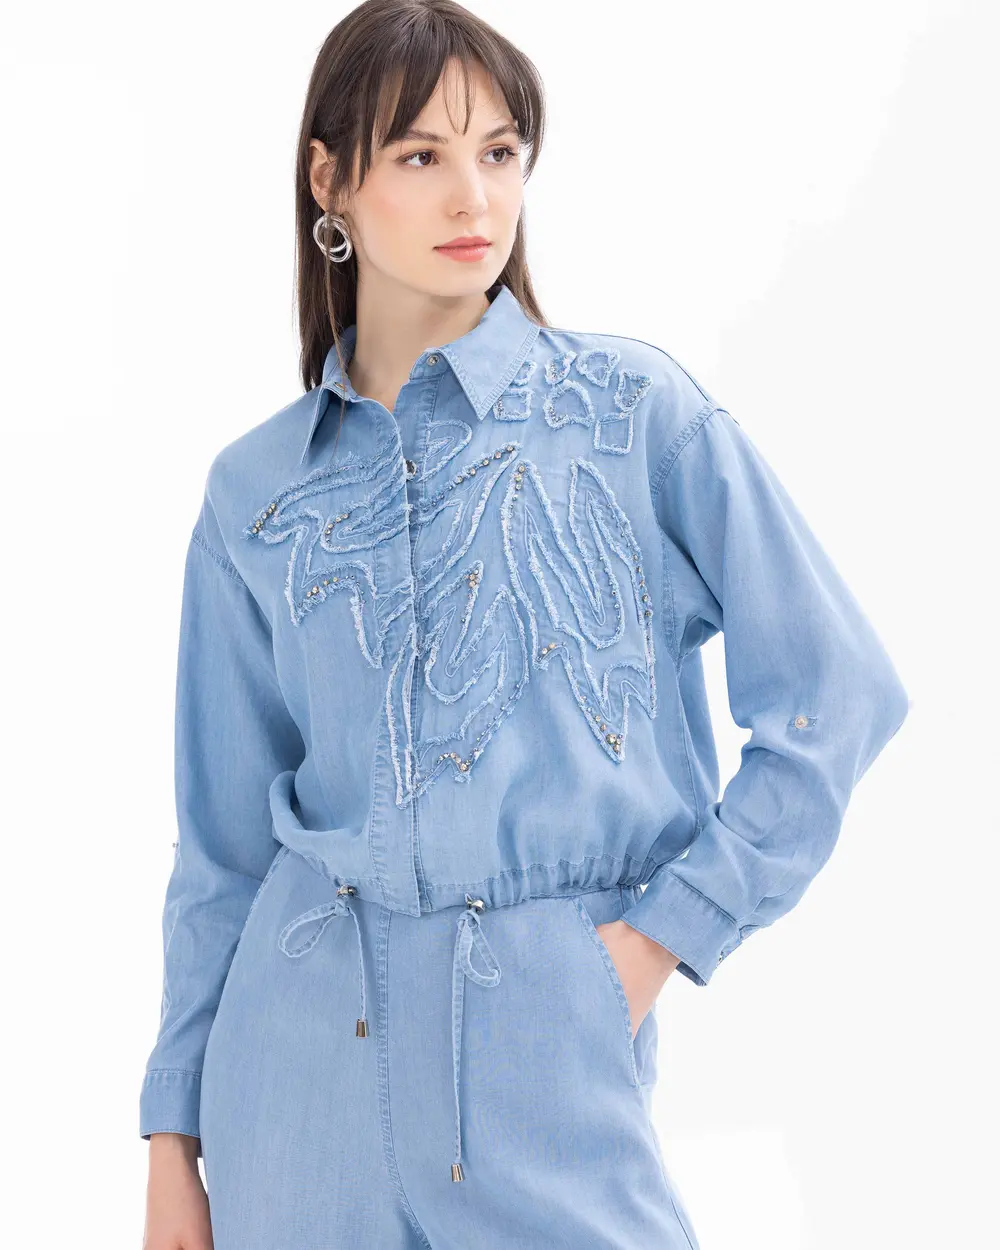 Stone Detailed Embroidered Waist Length Jean Jacket